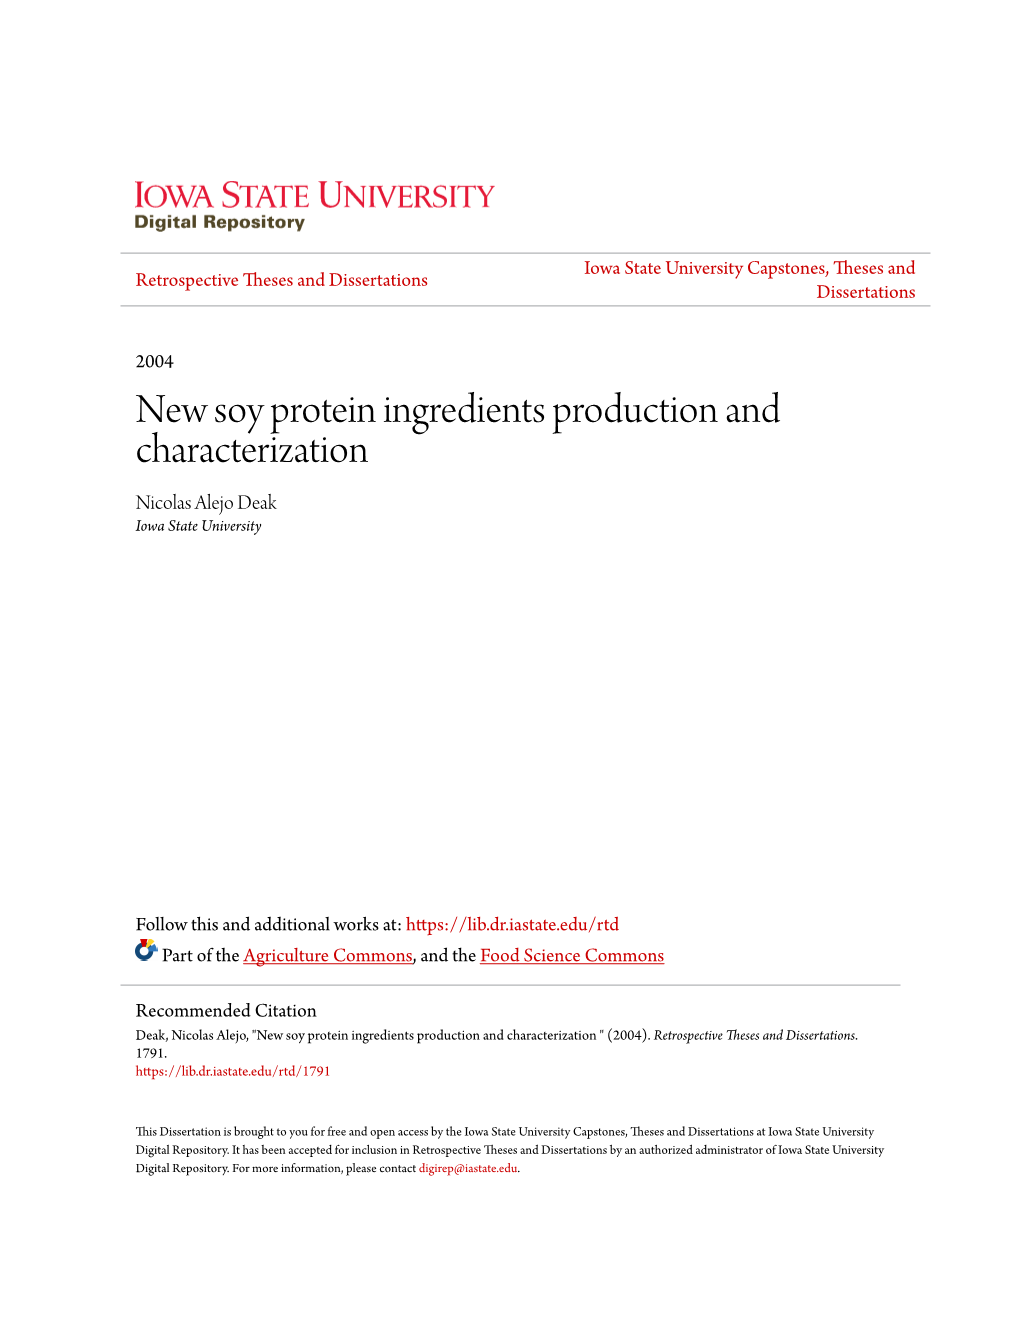 New Soy Protein Ingredients Production and Characterization Nicolas Alejo Deak Iowa State University